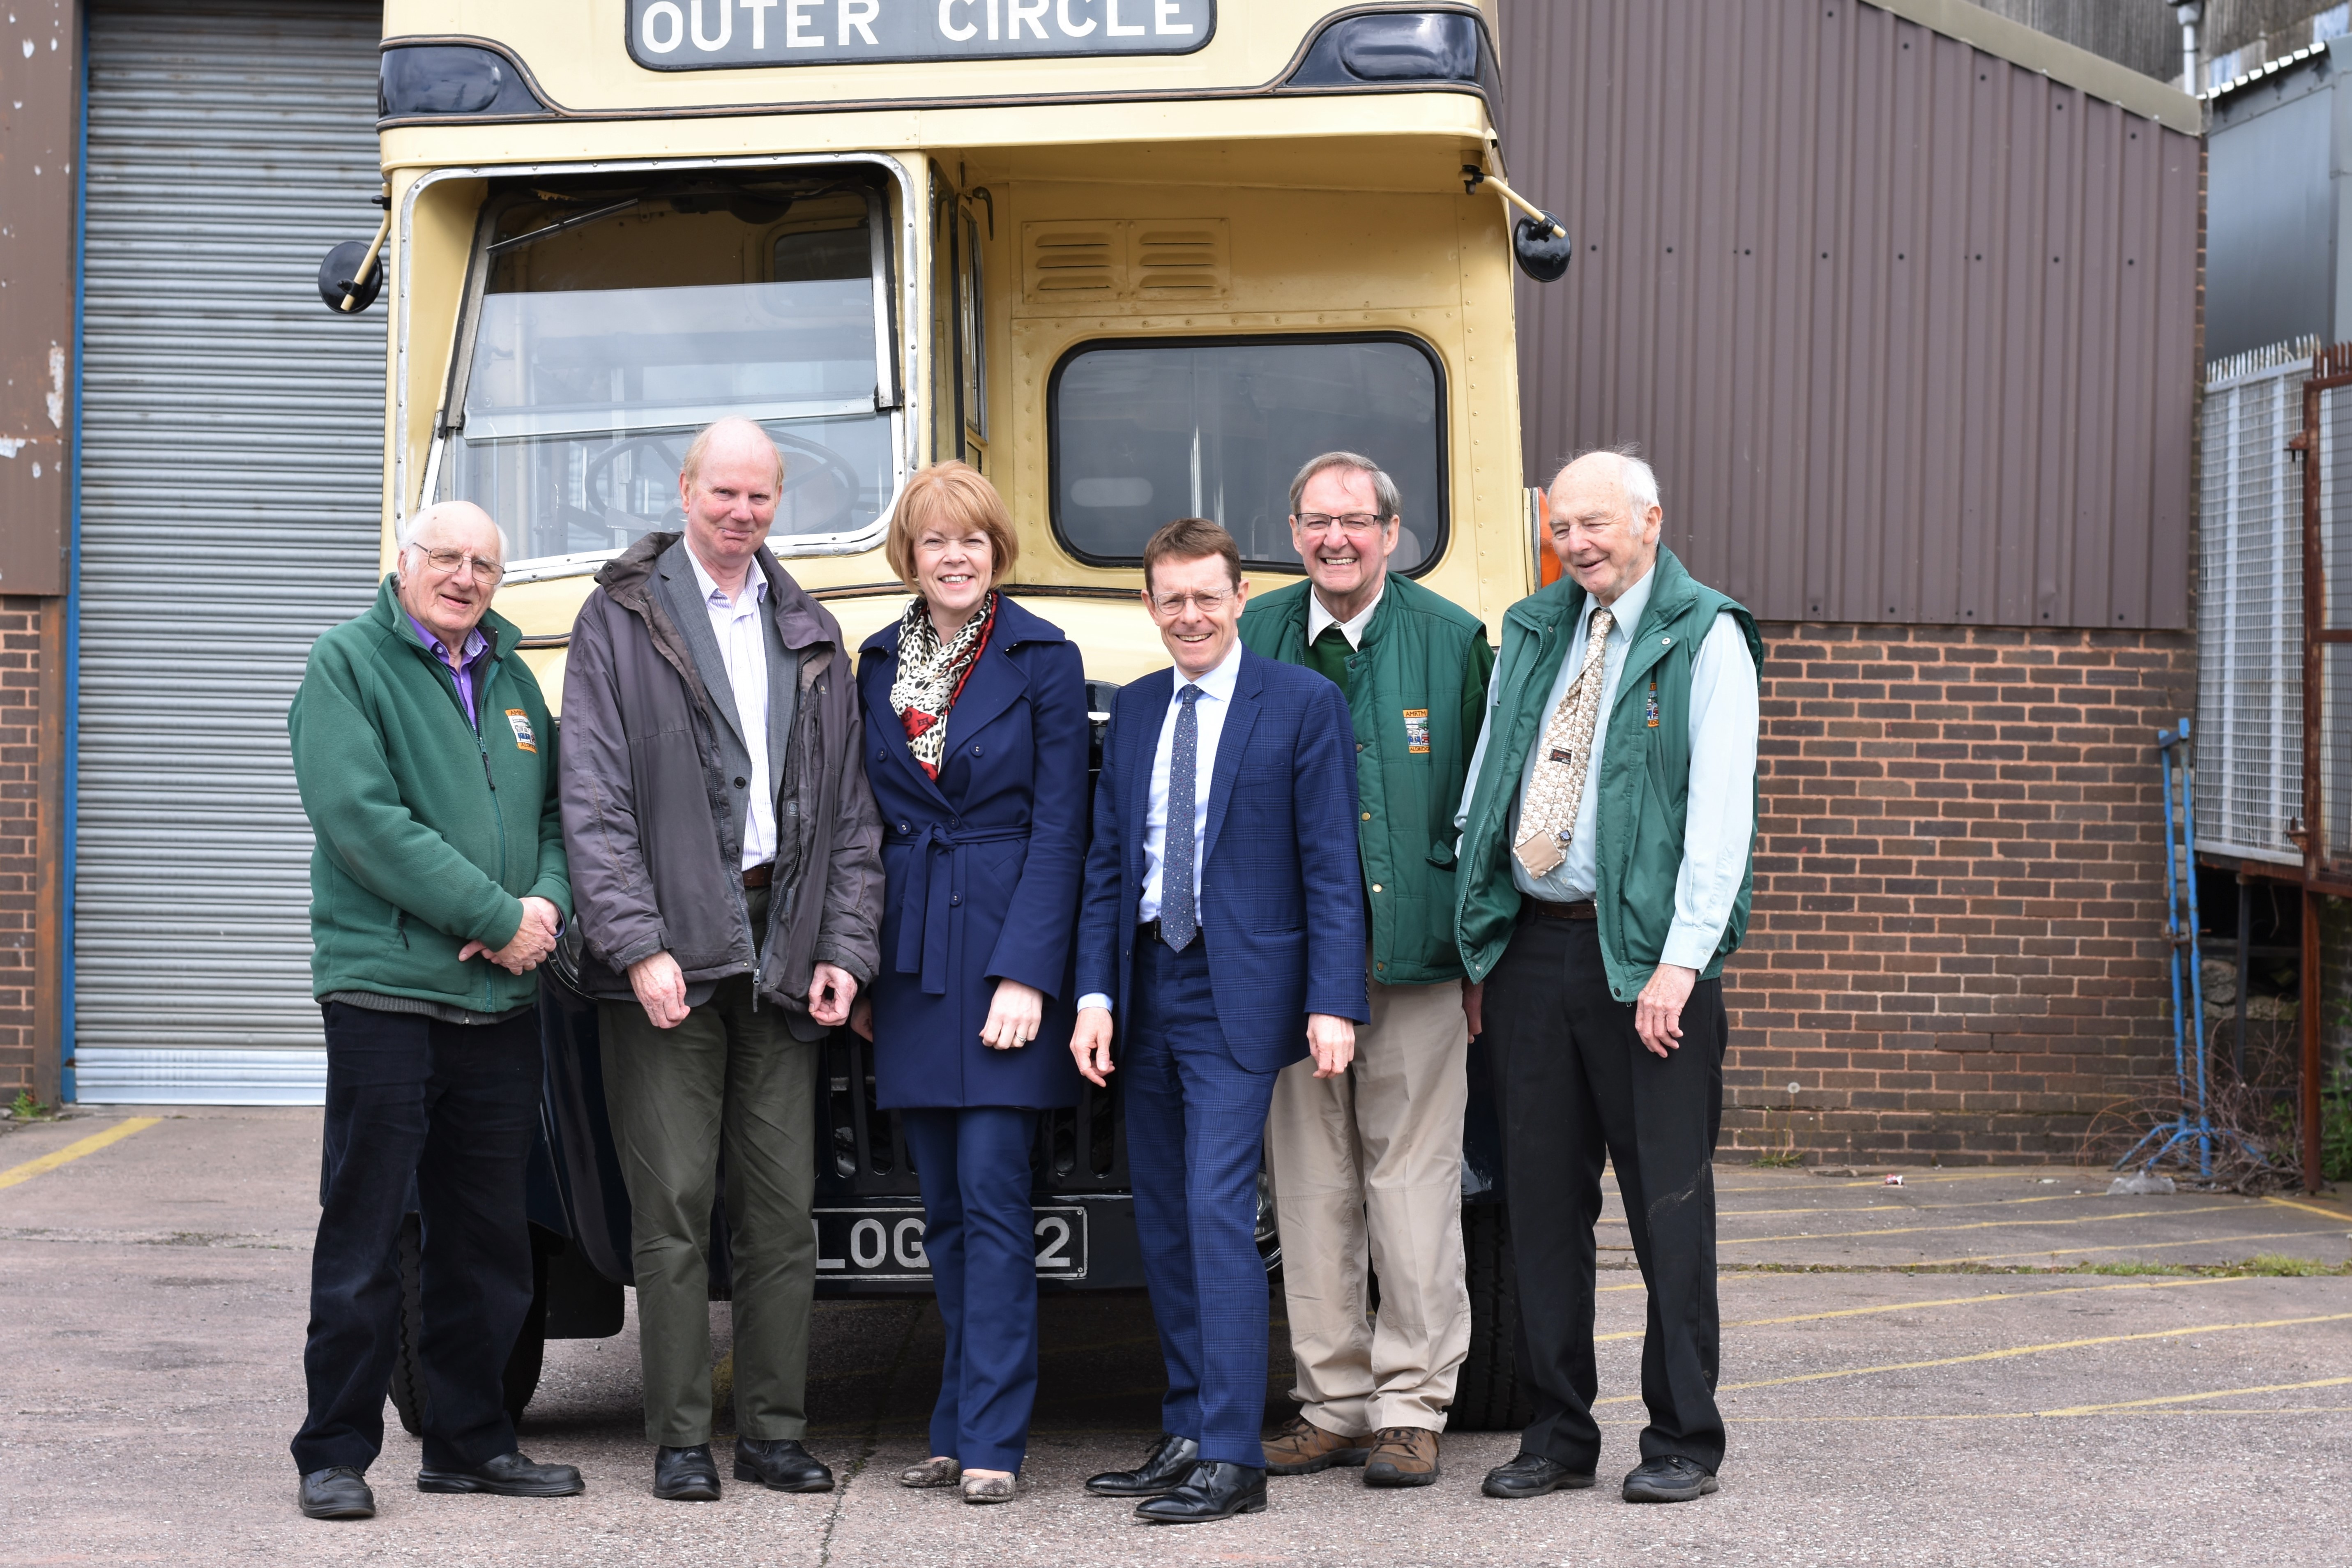 On the Buses! – A Visit to Aldridge Transport Museum with West Midlands Mayor, Andy Street